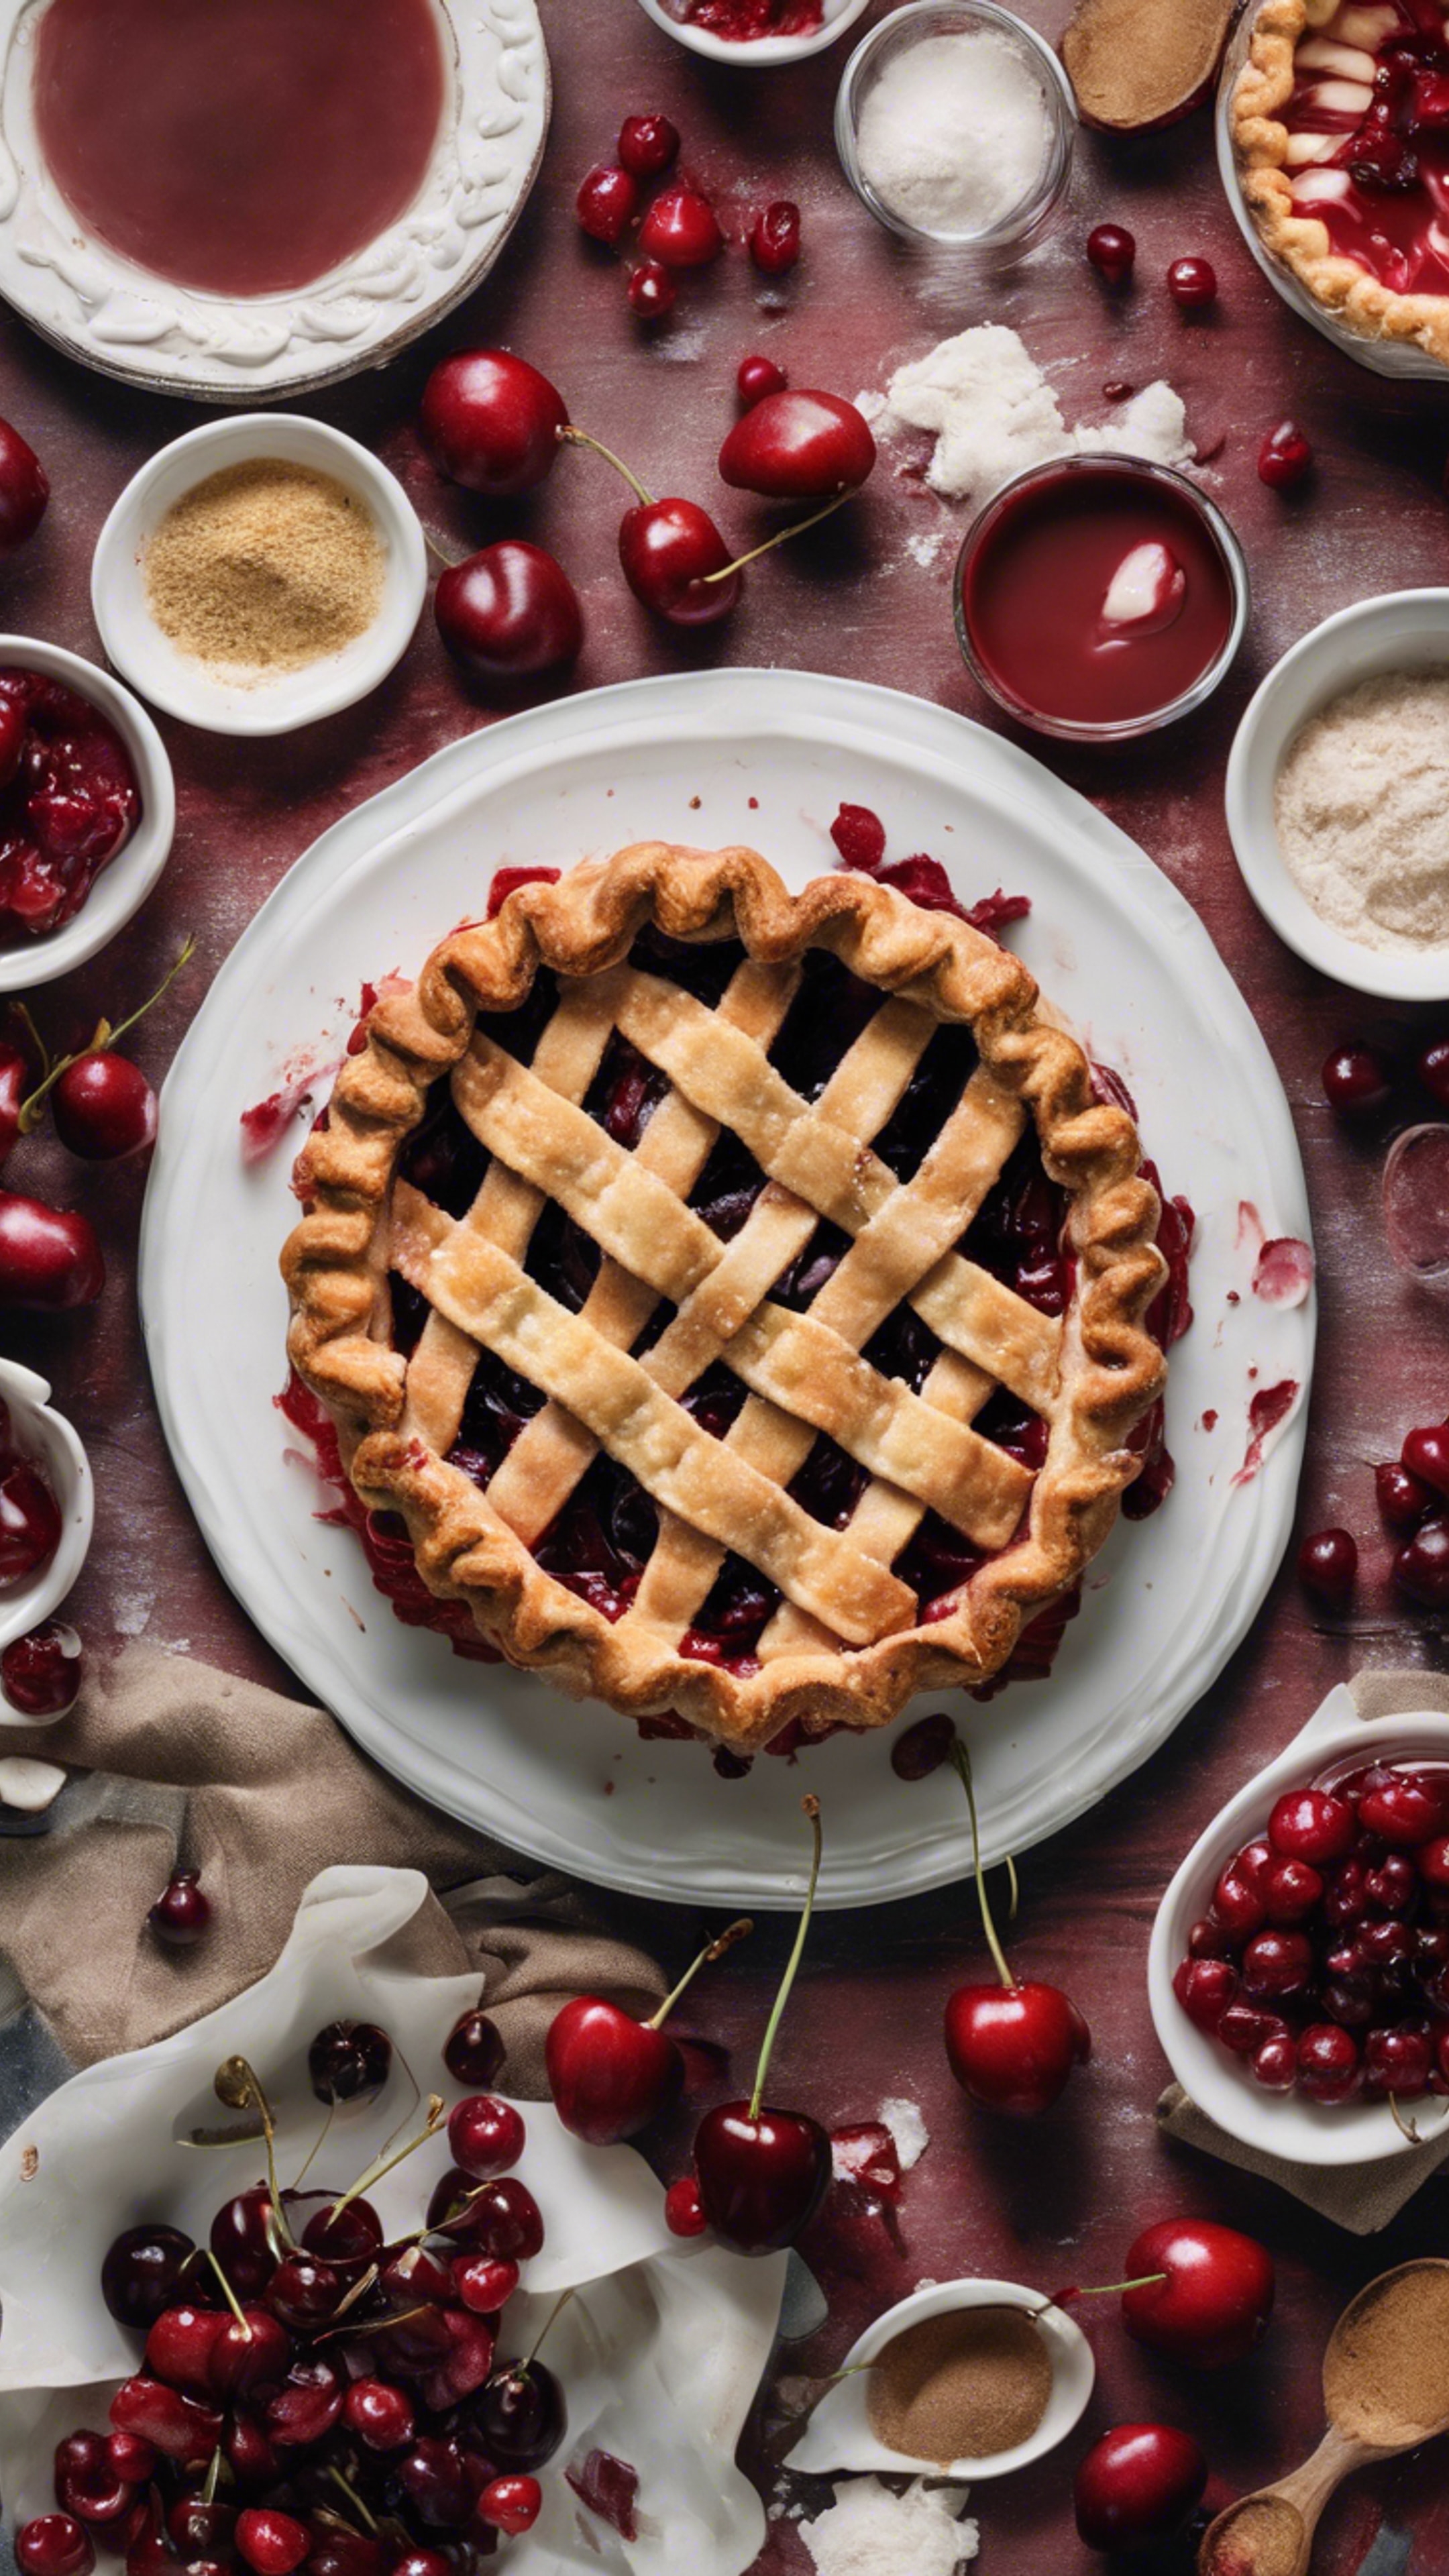 A deconstructed cherry pie, showing all ingredients separately in an overhead shot.壁紙[5696925d85294510918f]